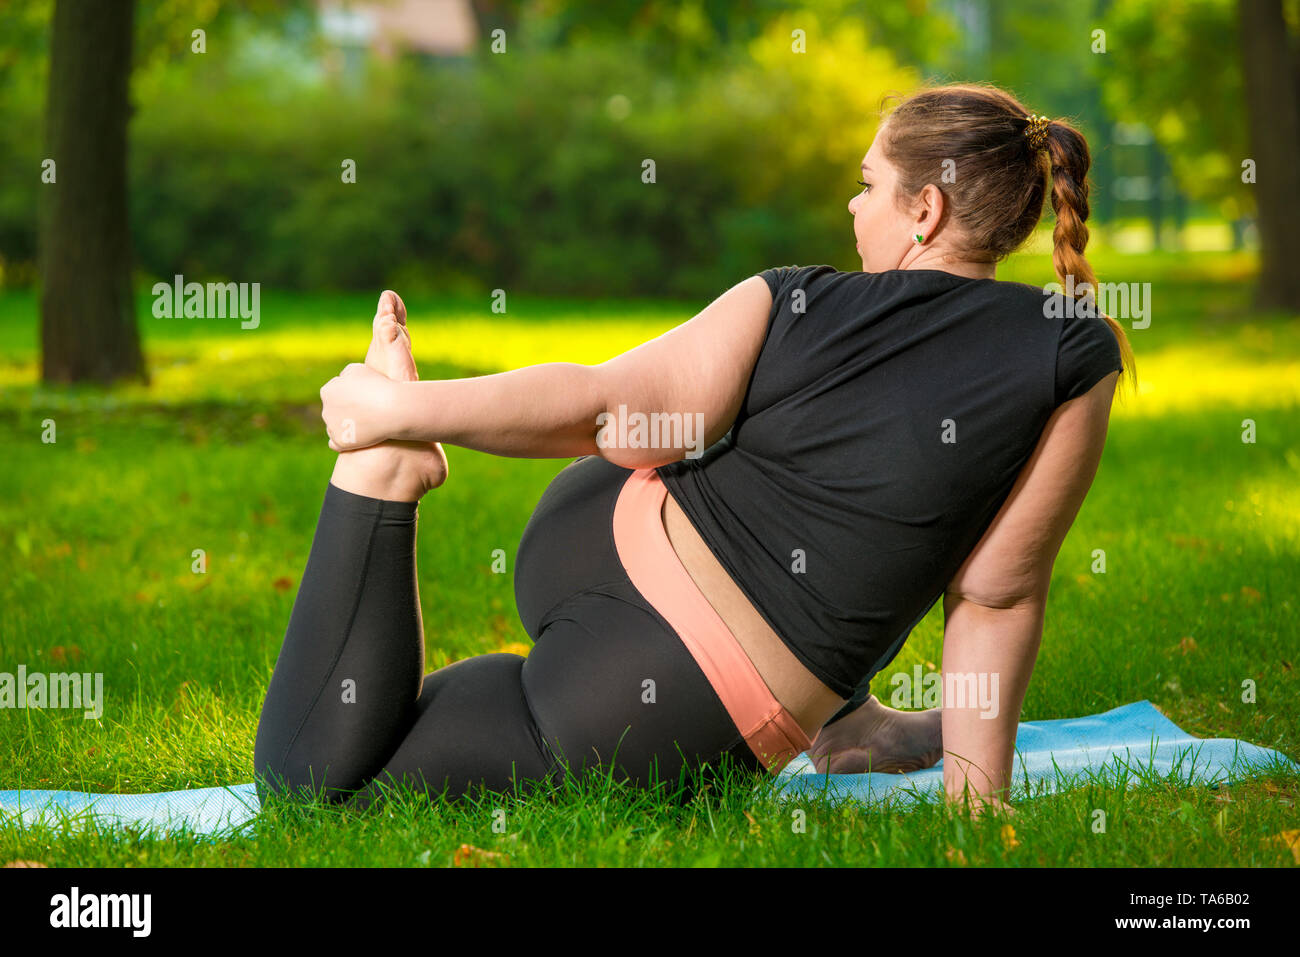 fat woman in the park doing yoga, plus size woman is very flexible and strong Stock Photo